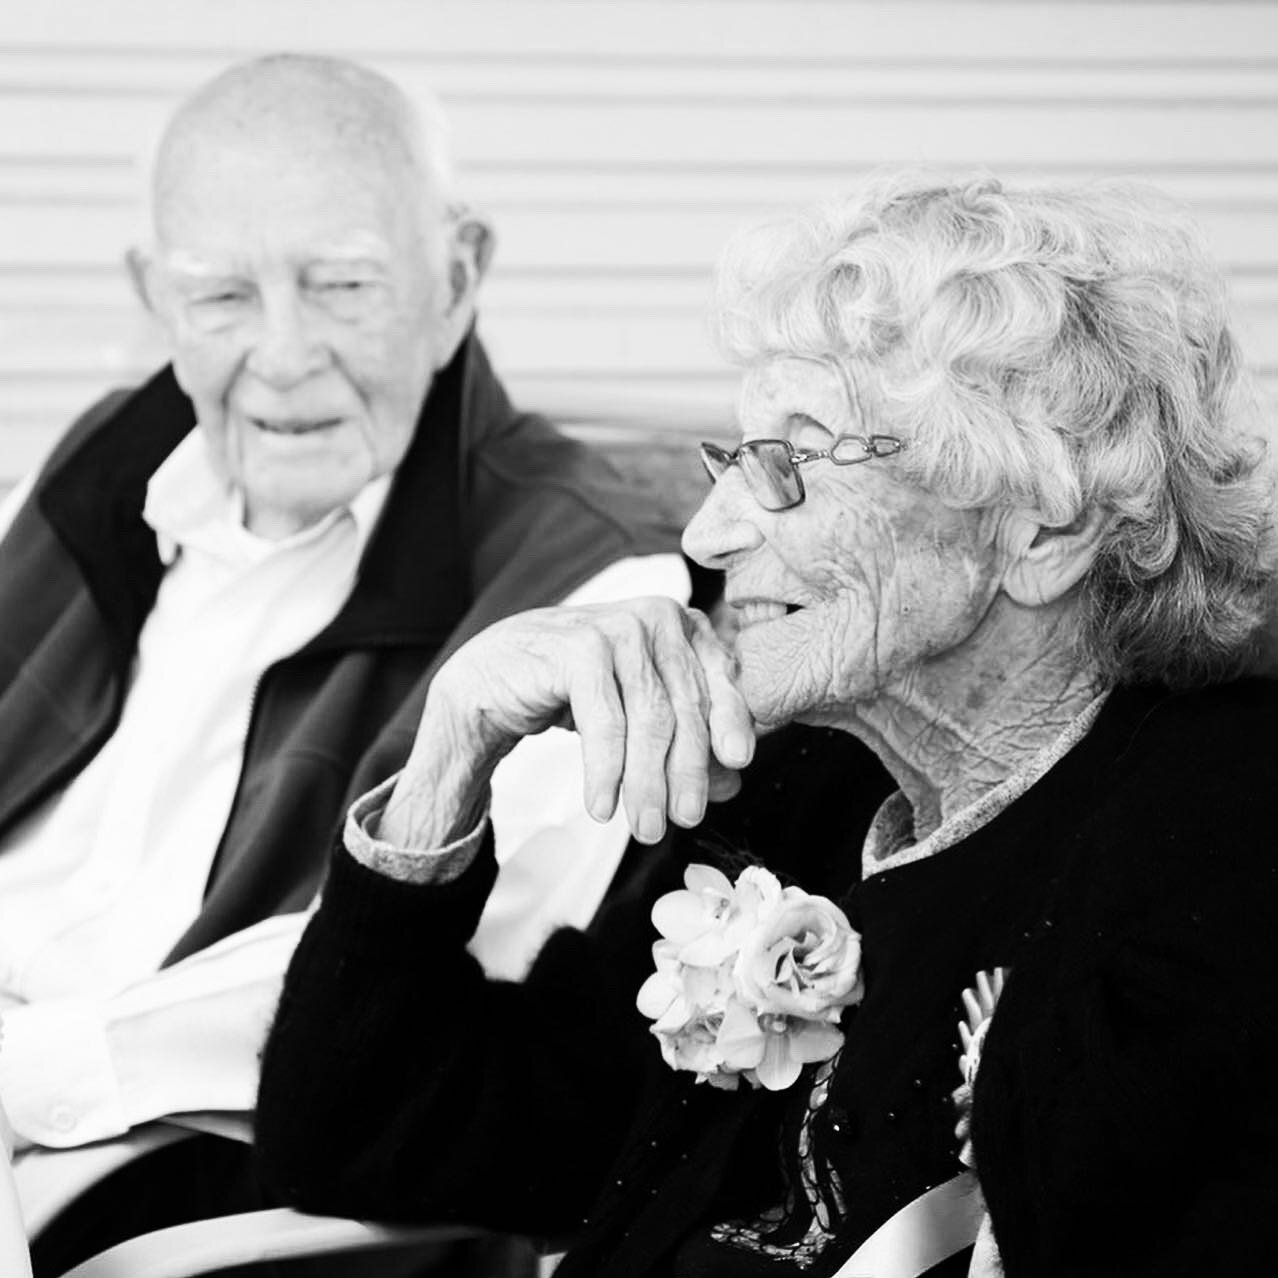 I wanted to celebrate this beautiful couple this Valentine&rsquo;s Day ❤️ Lyle &amp; Elva are the ultimate team &amp; their admiration for each other is so special to witness. 
I only know them because I was invited to capture both their 100th birthd